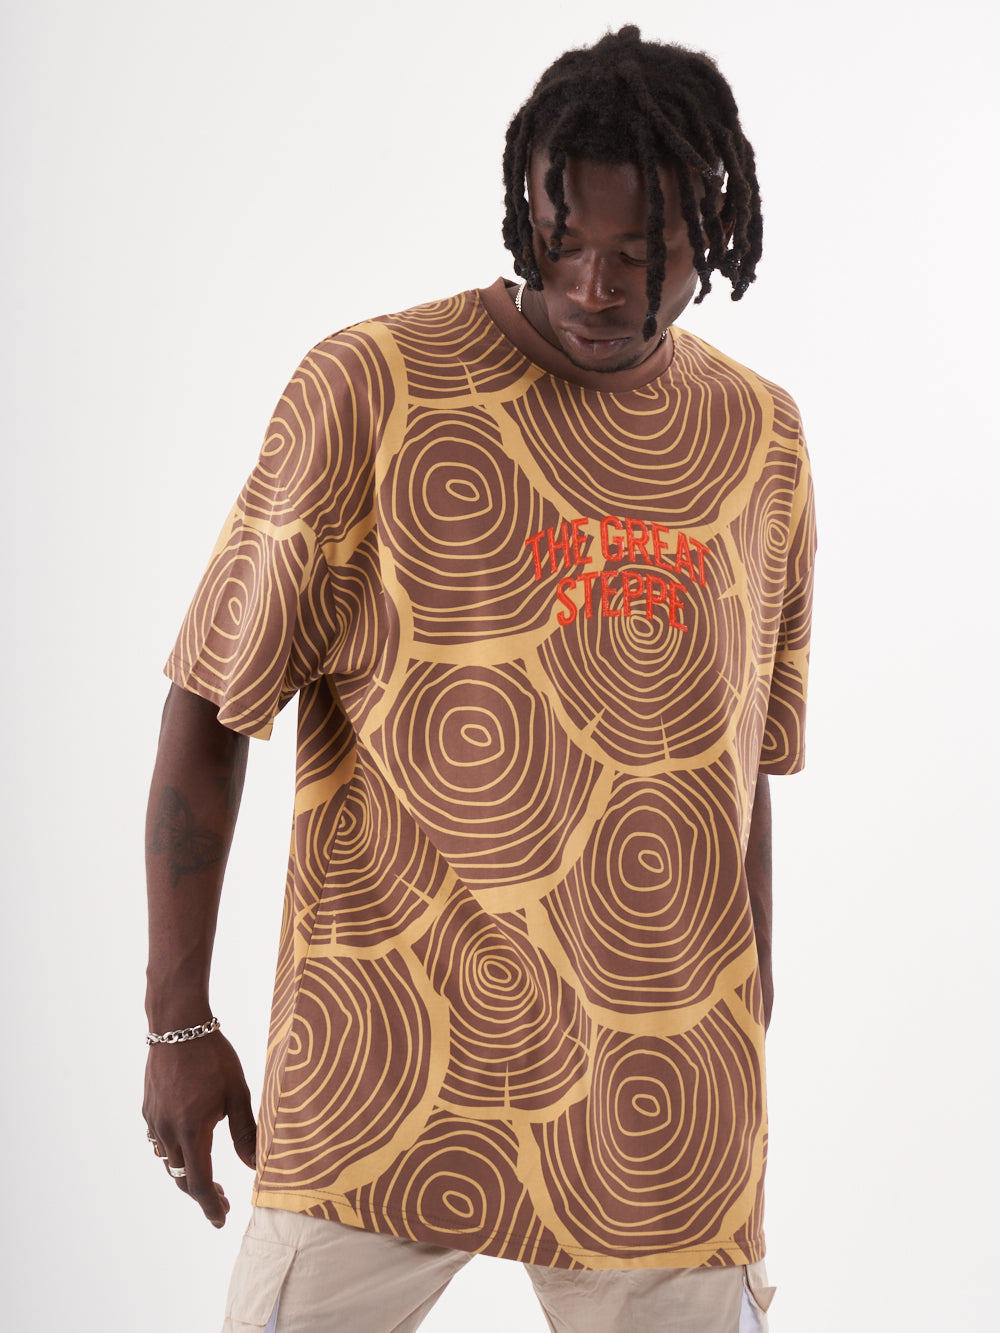 A man wearing a STEPPE T-SHIRT with a circular pattern.